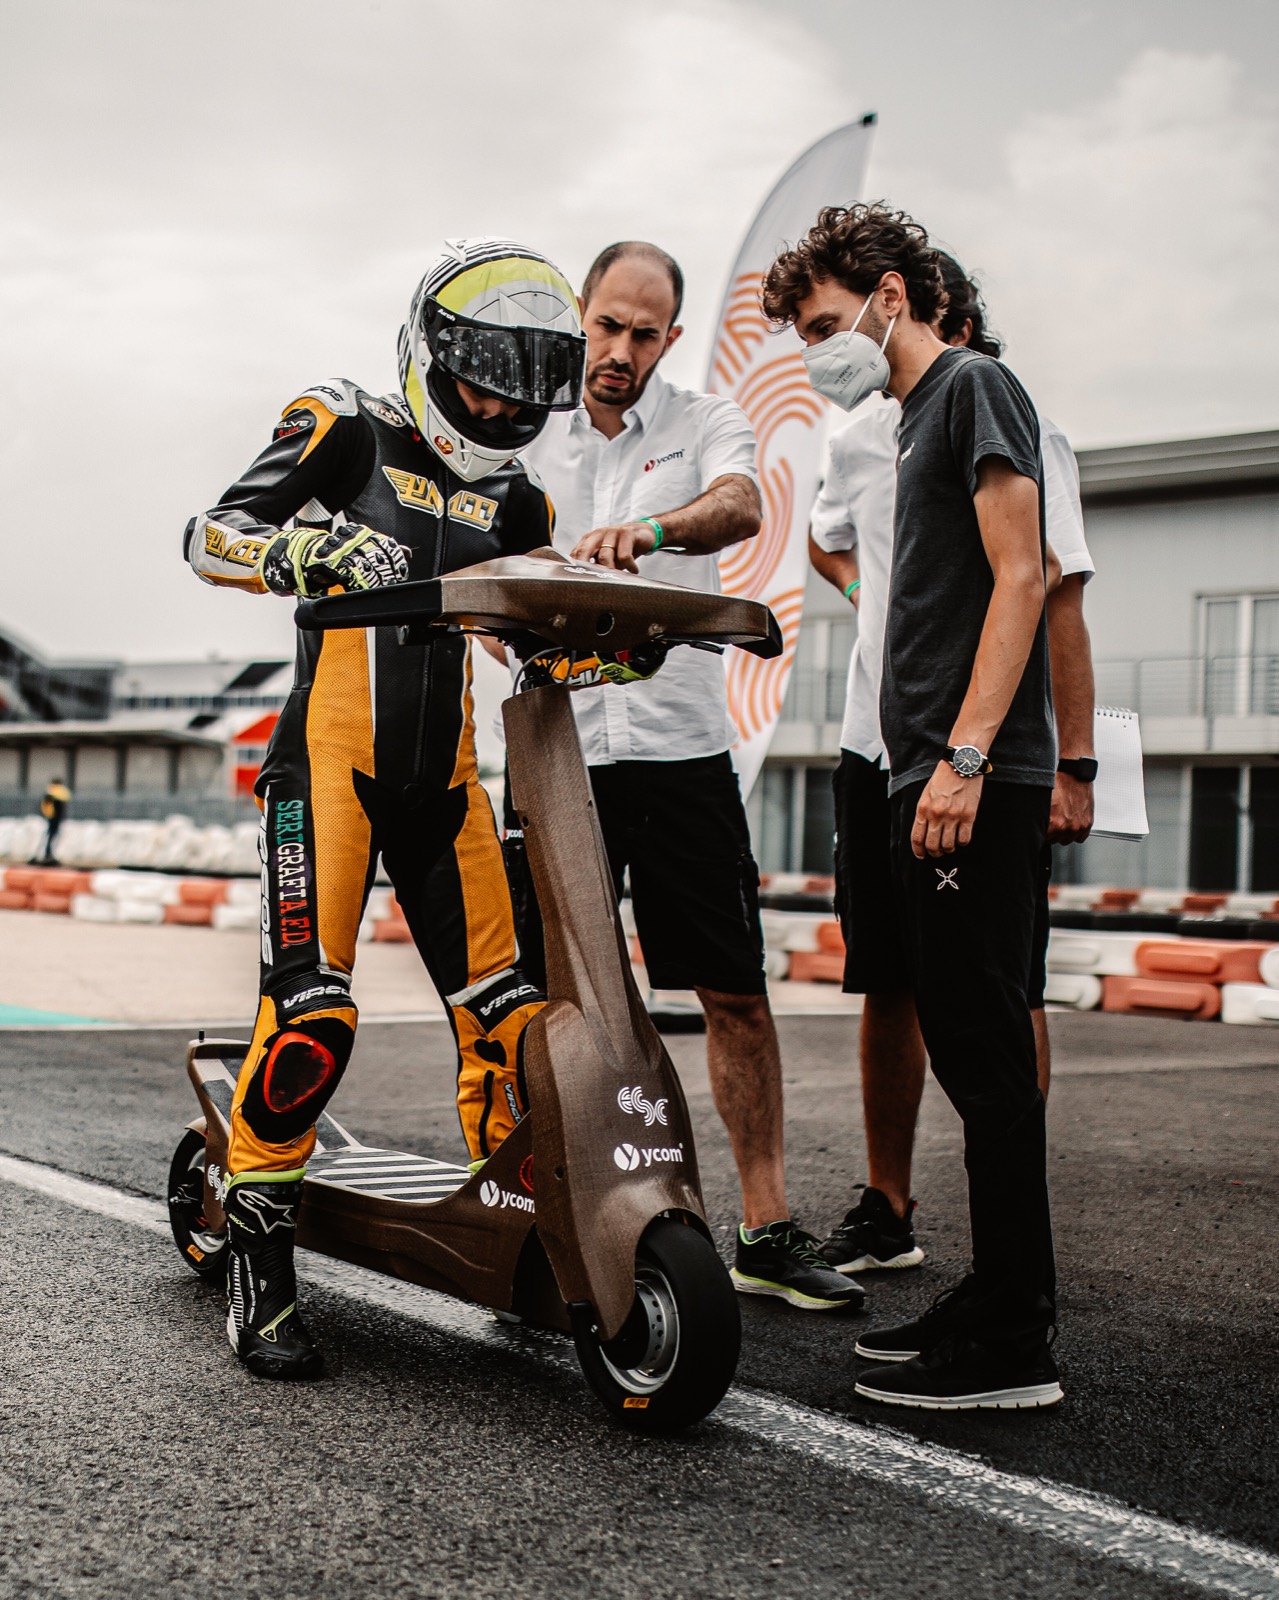 eSkootr Championship launches its new electric race scooter